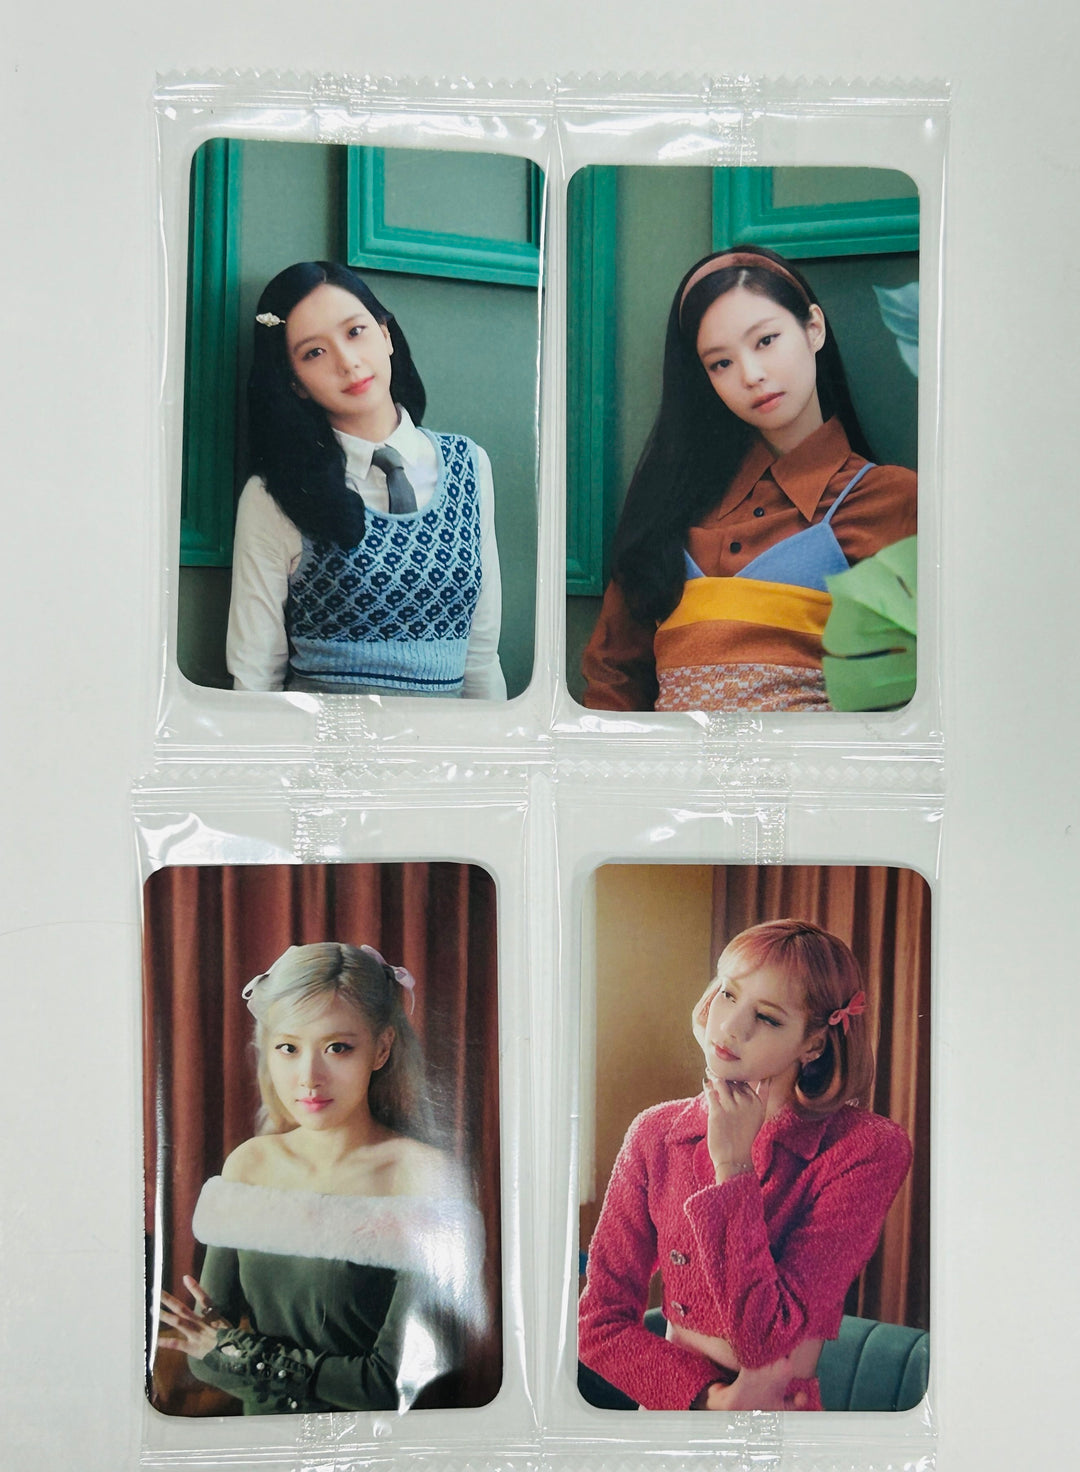 BLACKPINK "BLACKPINK THE GAME PHOTOCARD COLLECTION BACK TO RETRO" - Ktown4U Pre-Order Benefit Photocard [24.4.29]